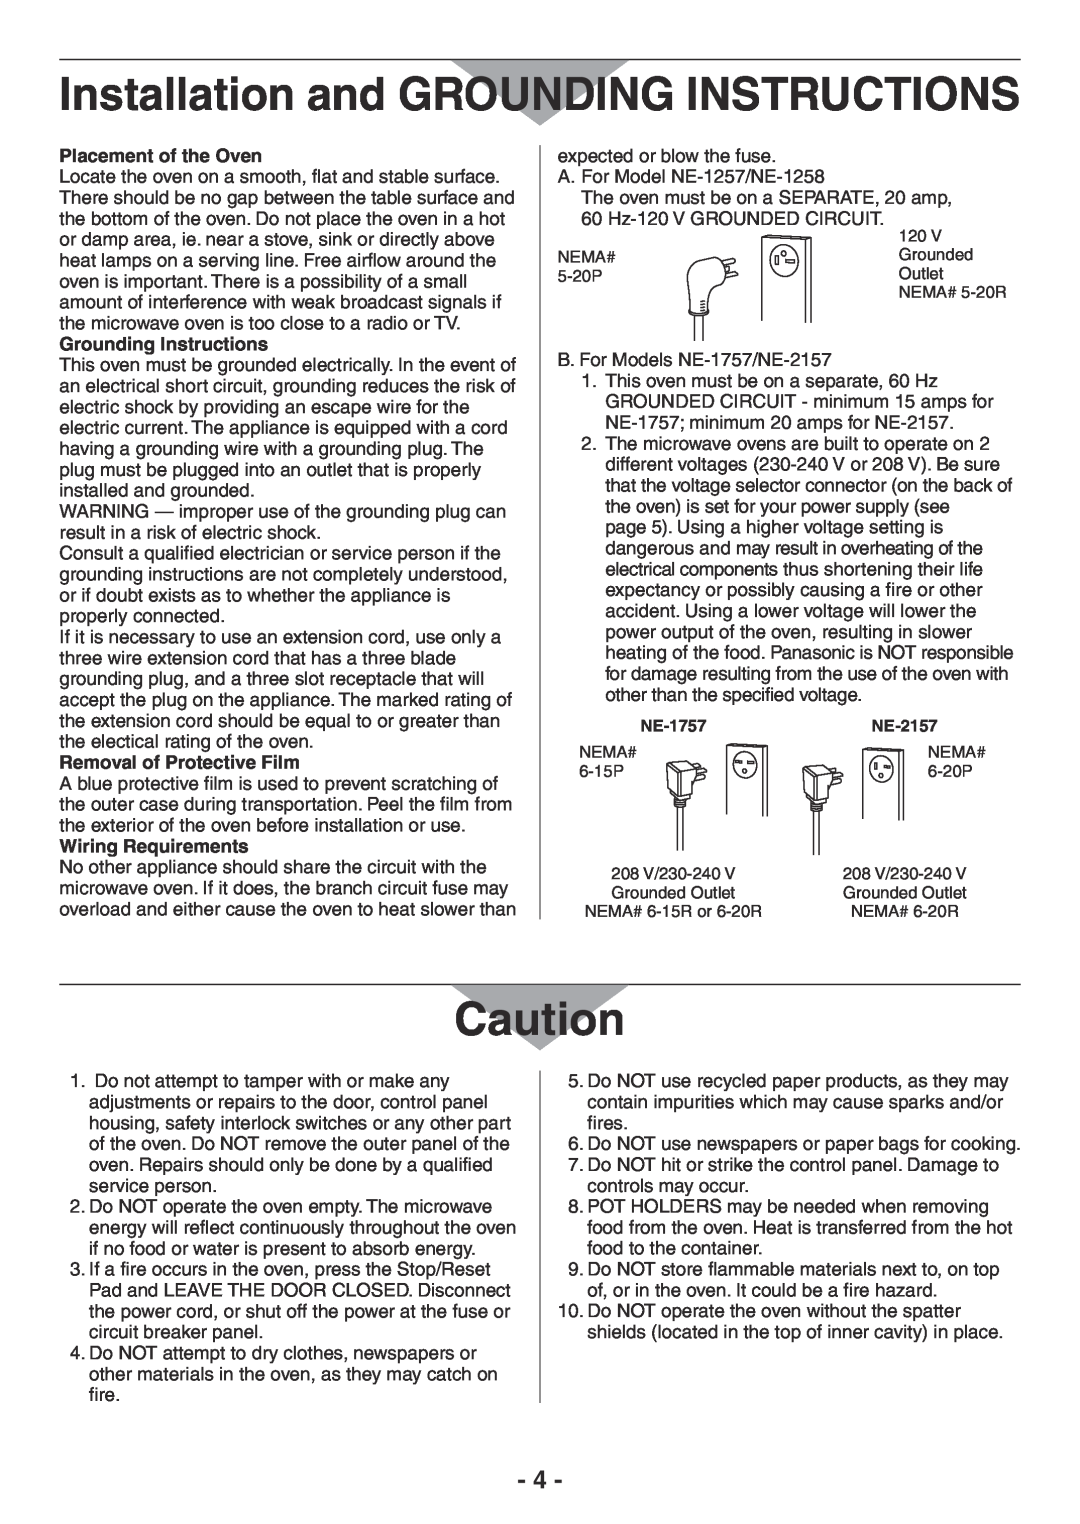 Panasonic NE-2157R, NE-1757R manual Installation and GROUNDING INSTRUCTIONS, Placement of the Oven, Grounding Instructions 